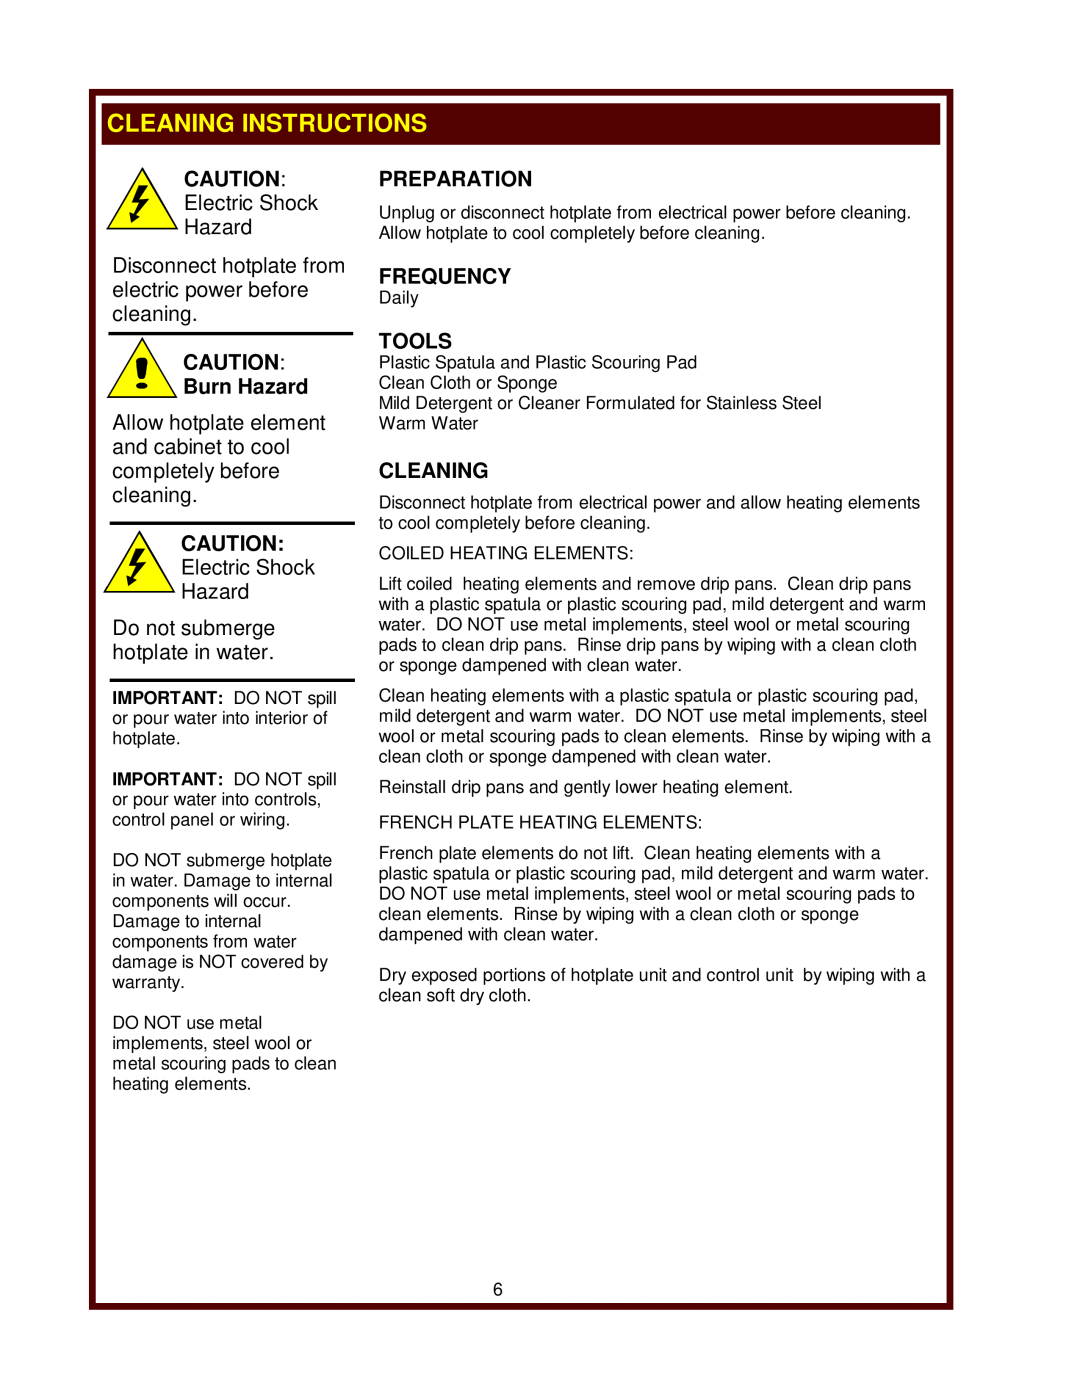 Wells H-636, H-706, H-336 operation manual Cleaning Instructions, Burn Hazard, Preparation, Frequency, Tools 